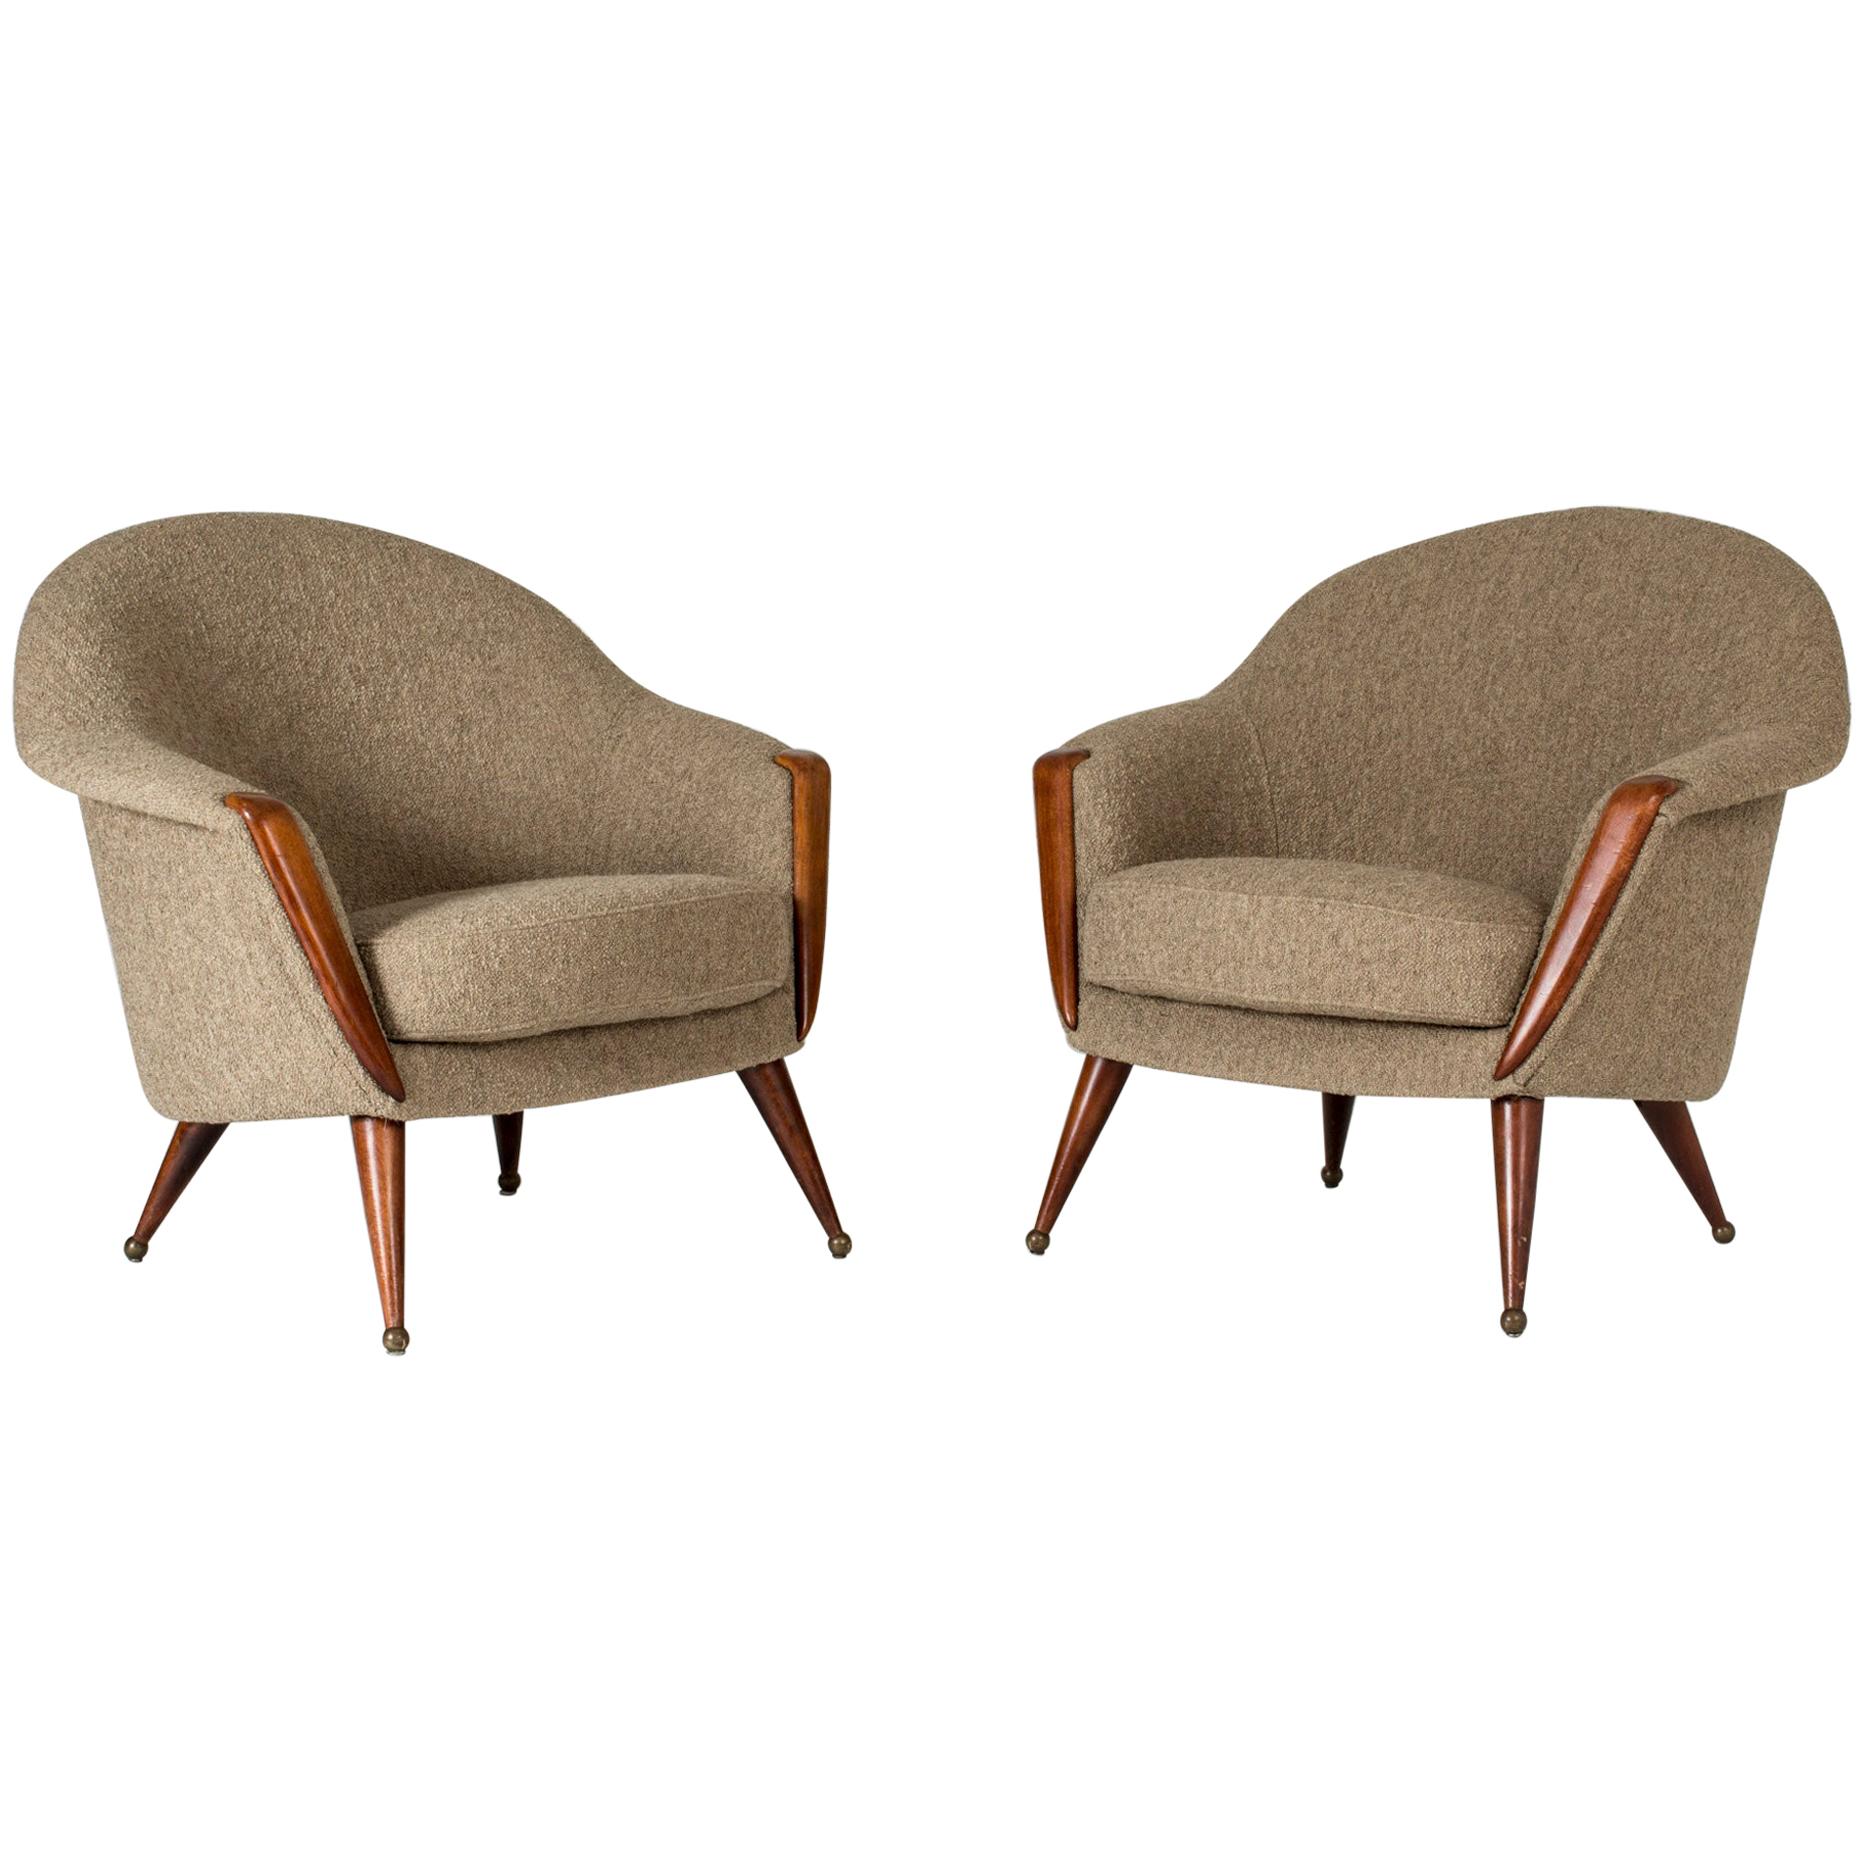 Pair of "Orion" Lounge Chairs by Folke Jansson